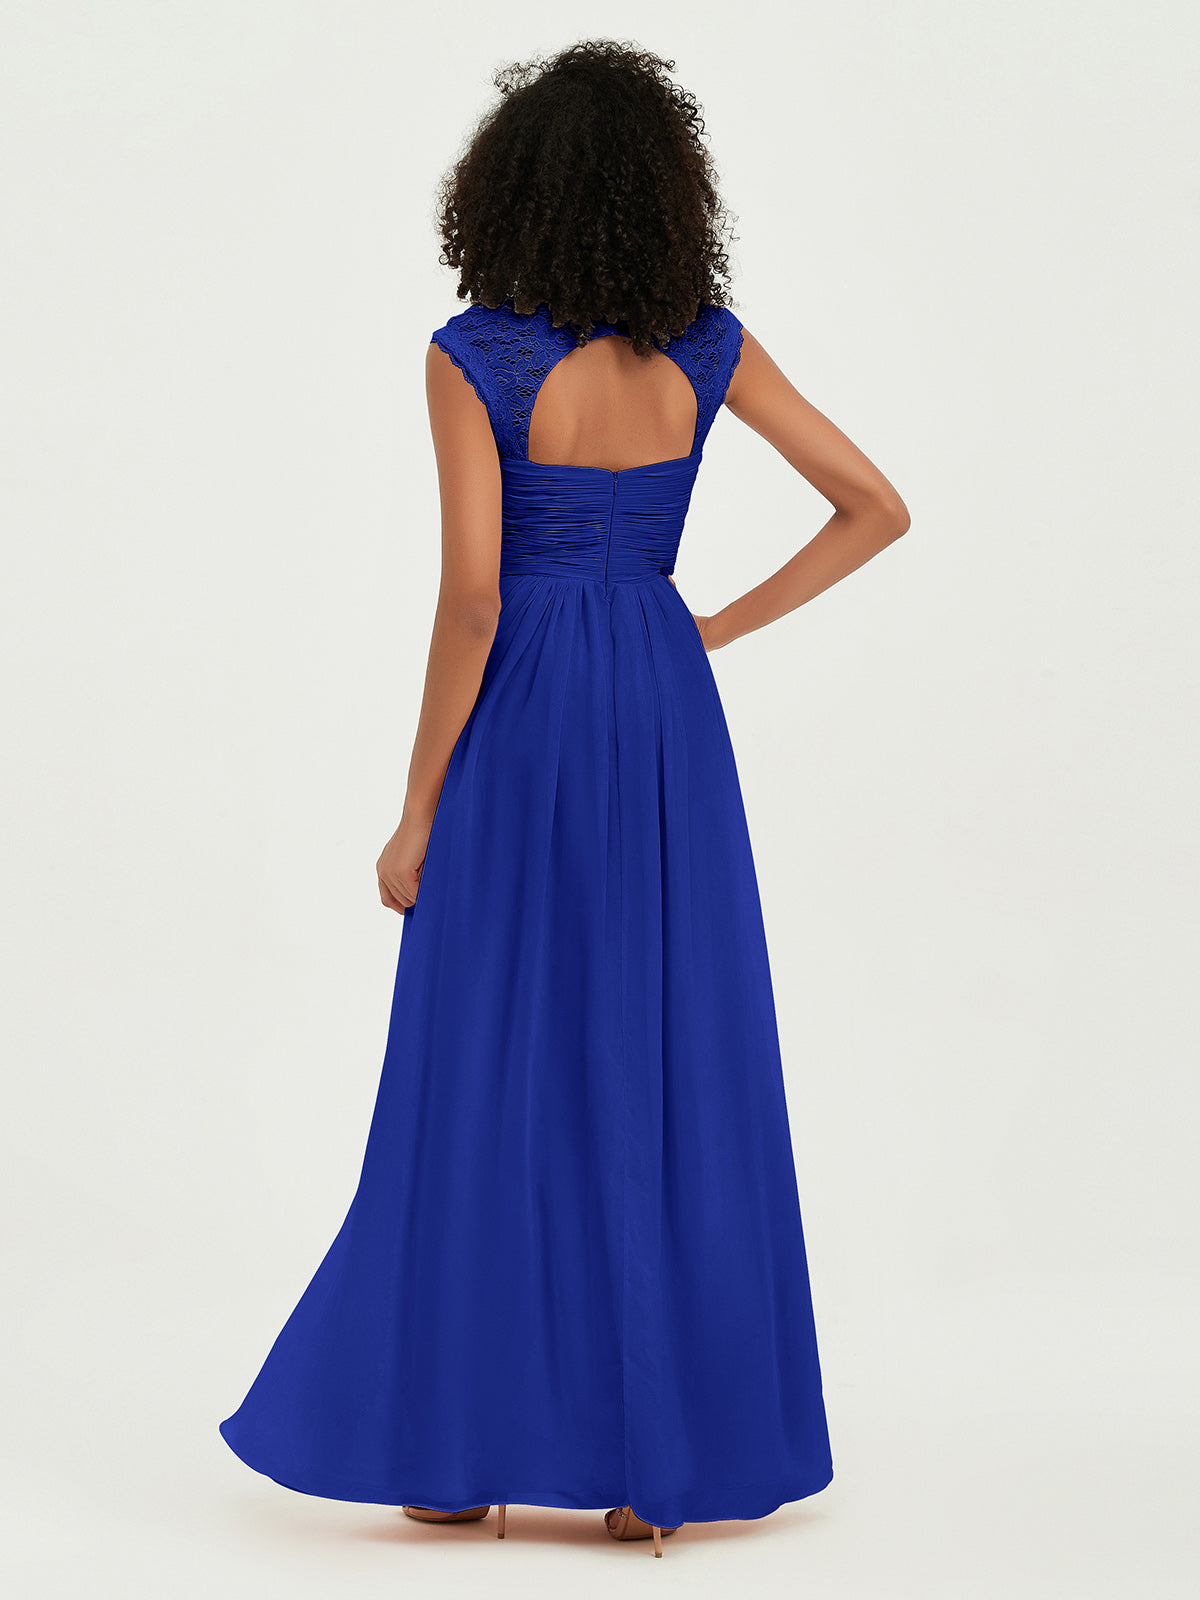 Sweetheart Chiffon Dresses with Lace Cap Sleeves Royal Blue